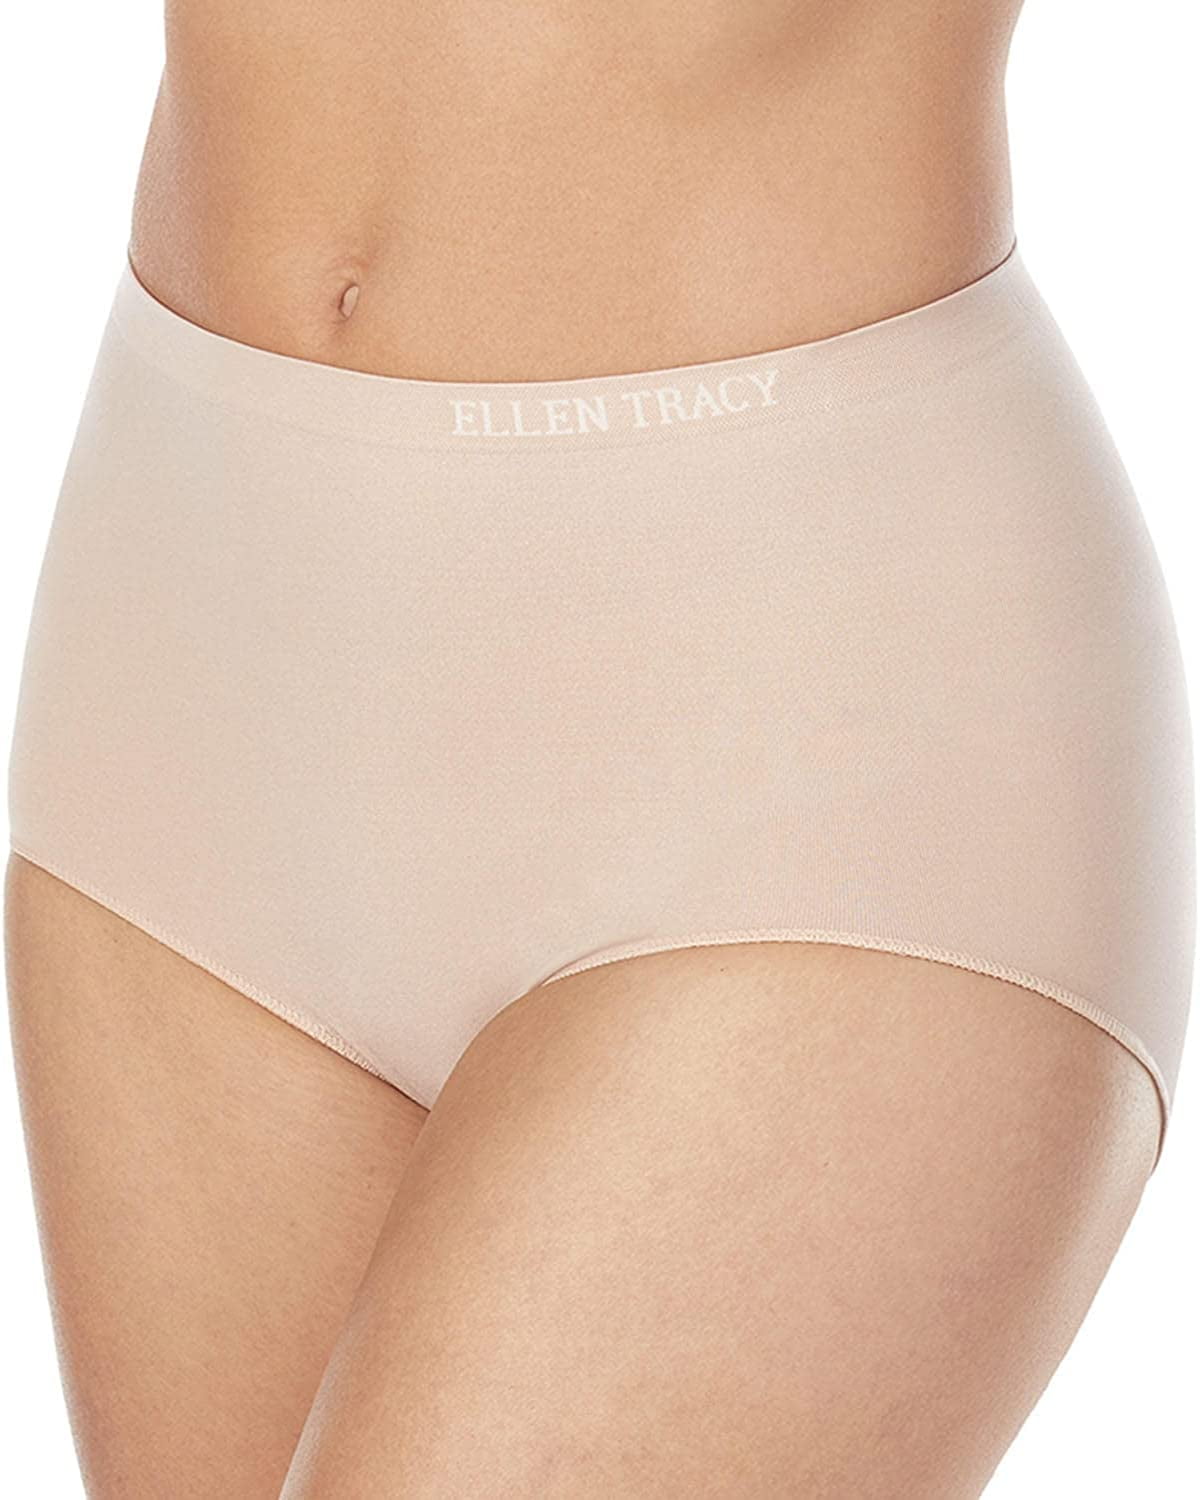 Company Ellen Tracy Women's Underwear Ultra Soft Seamless Floral Stripe  Full Brief Panties 3-Pack Multipack - Medium at  Women's Clothing  store